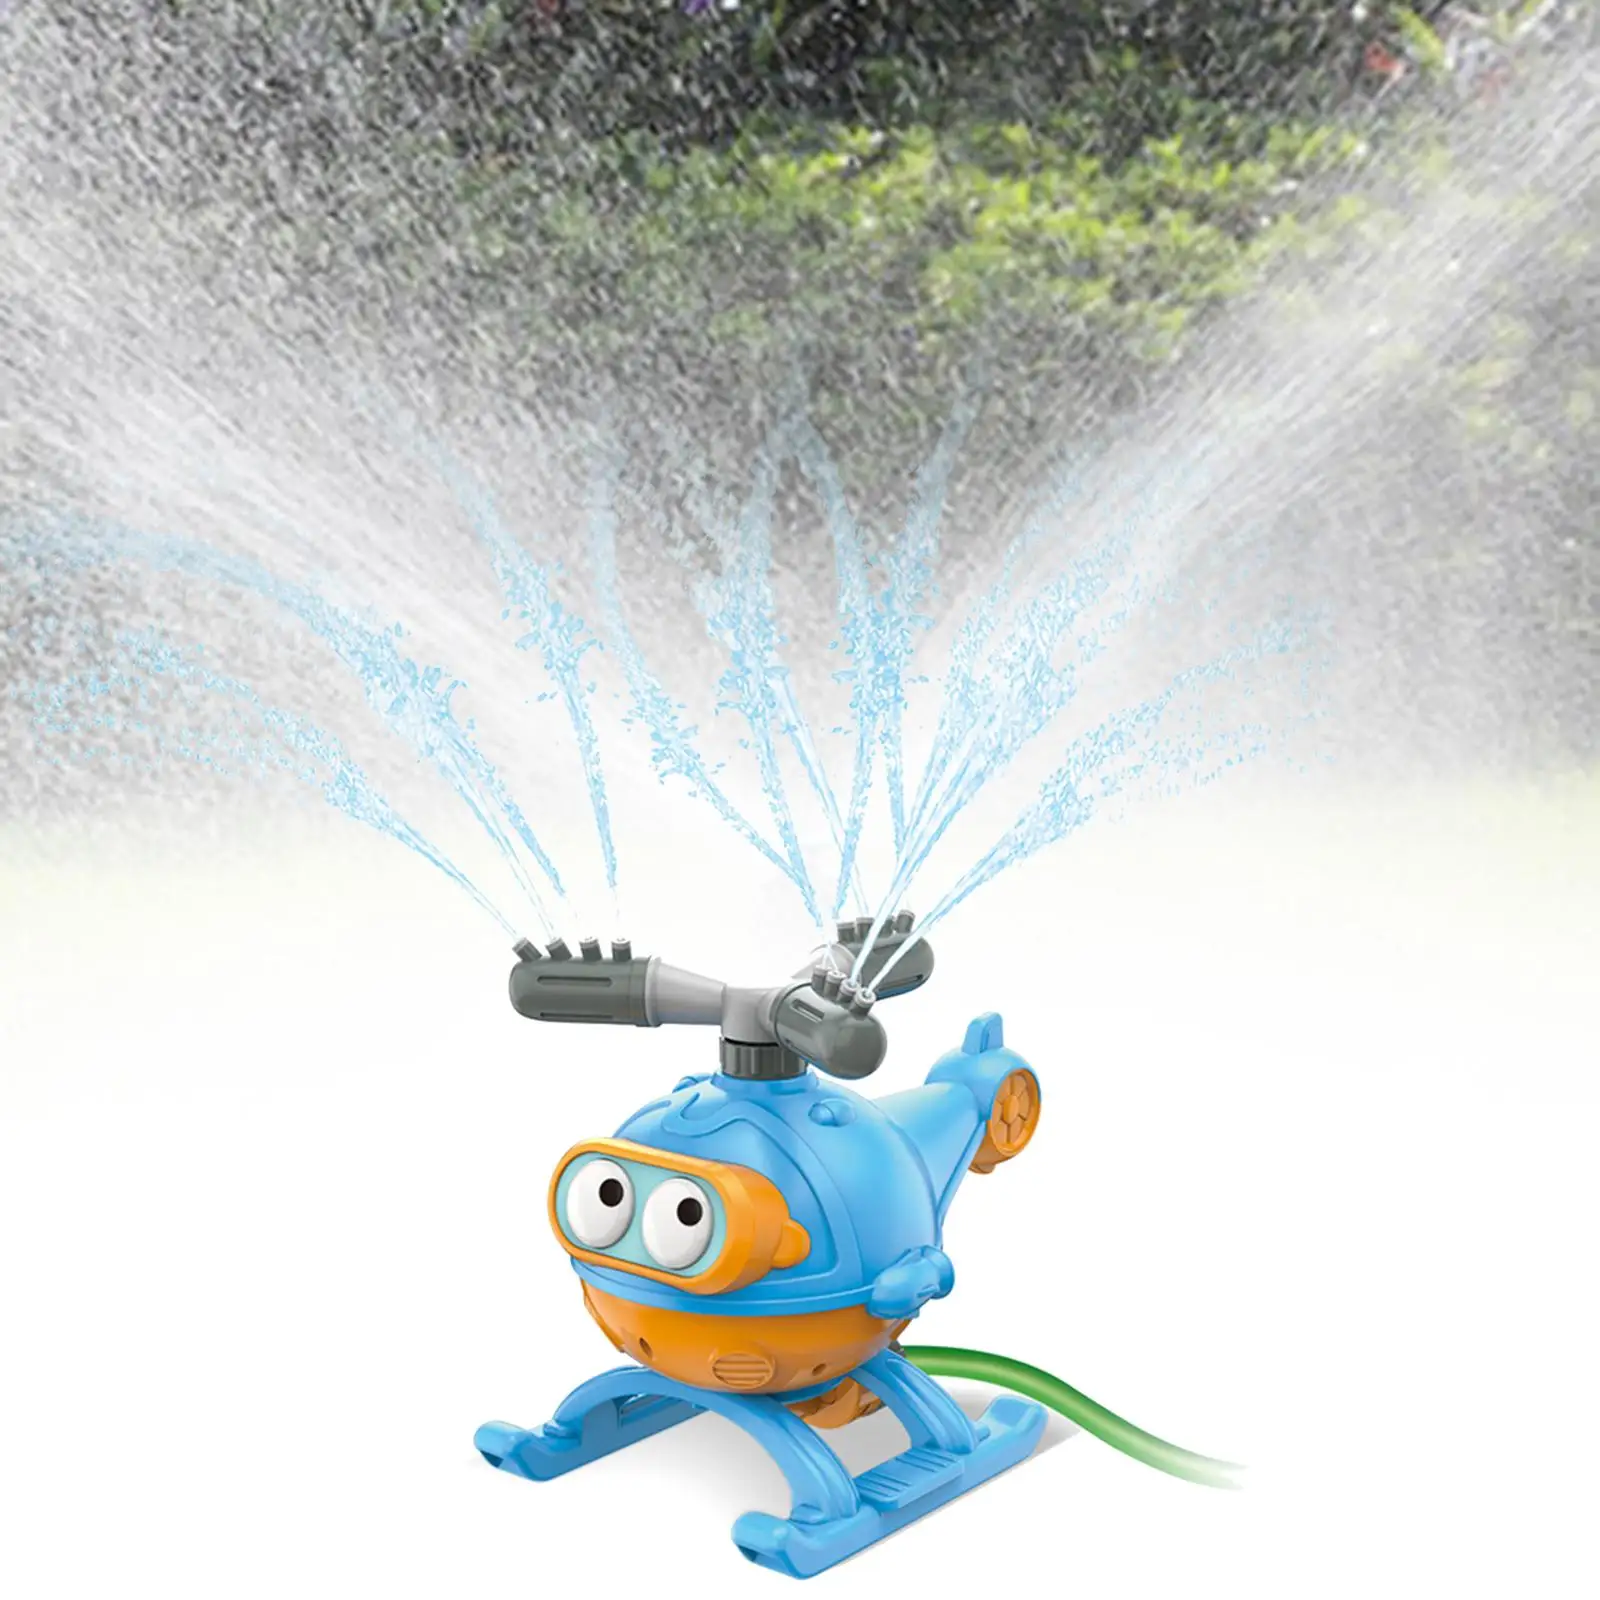 Helicopter Sprinkler Toy Attaches to Garden Hose Backyard Rotating Sprinklers for Kids Summer Toy Backyard Pool Yard